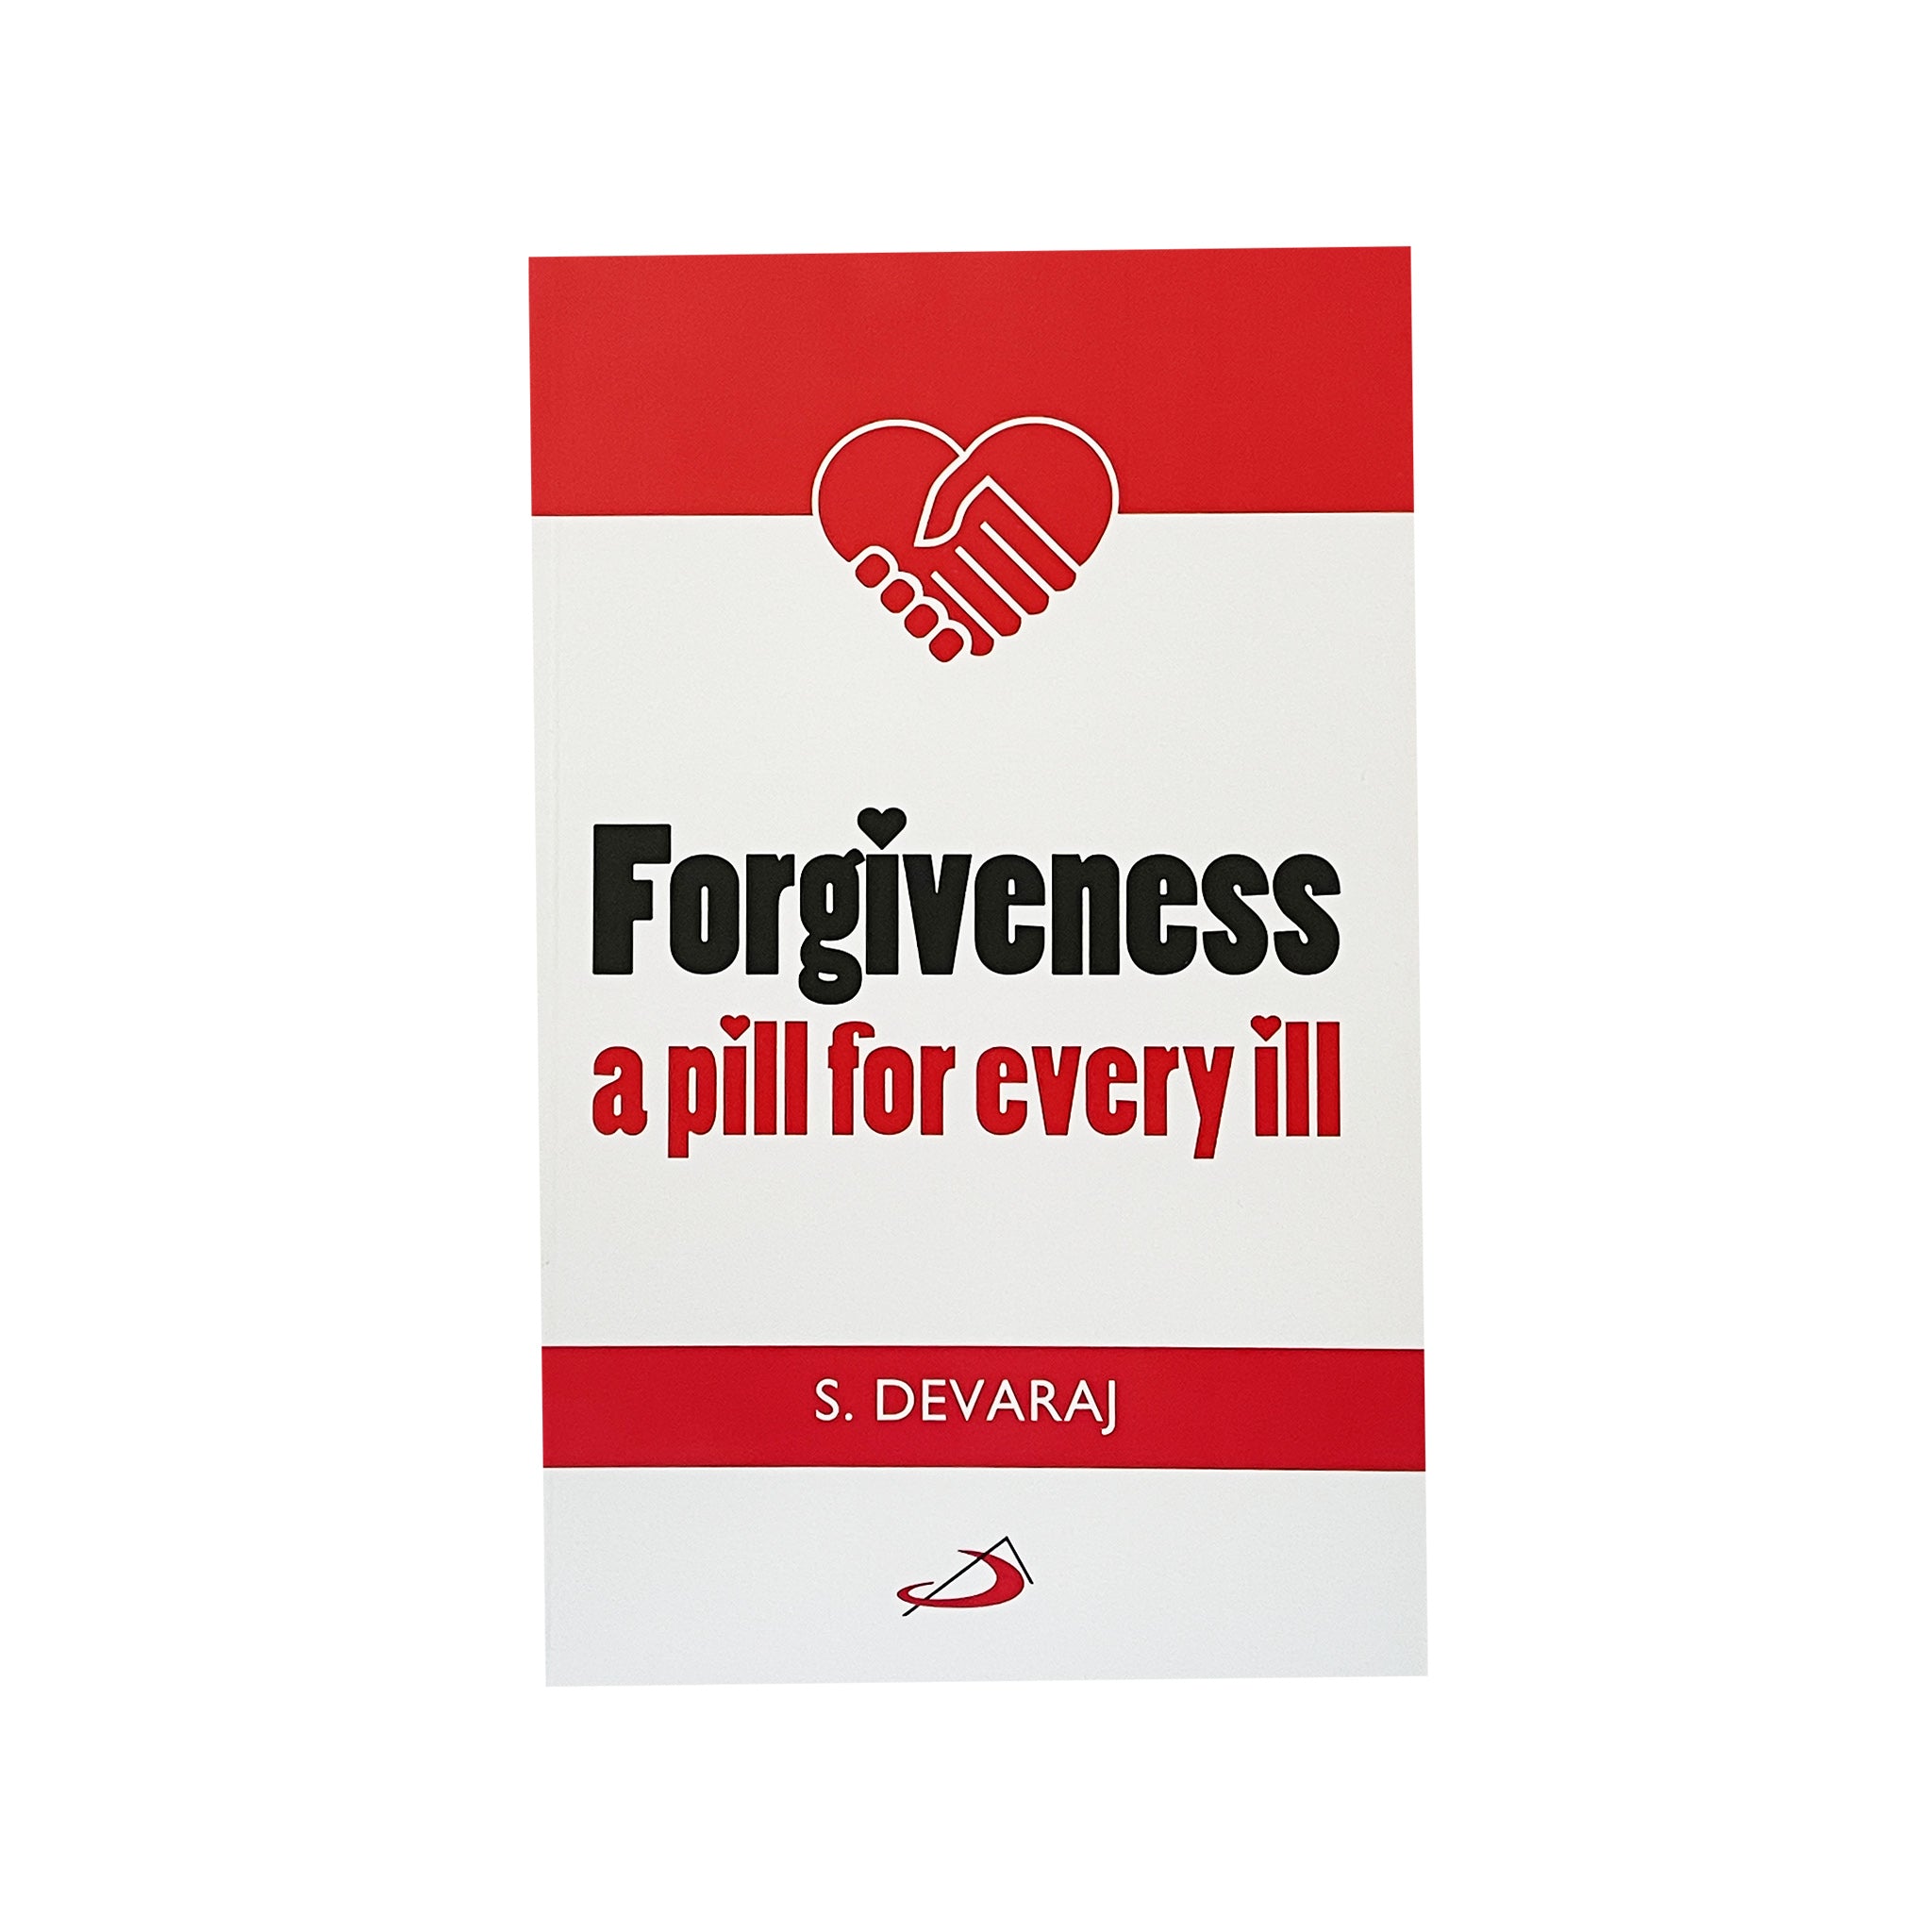 FORGIVENESS - A PILL FOR EVERY ILL